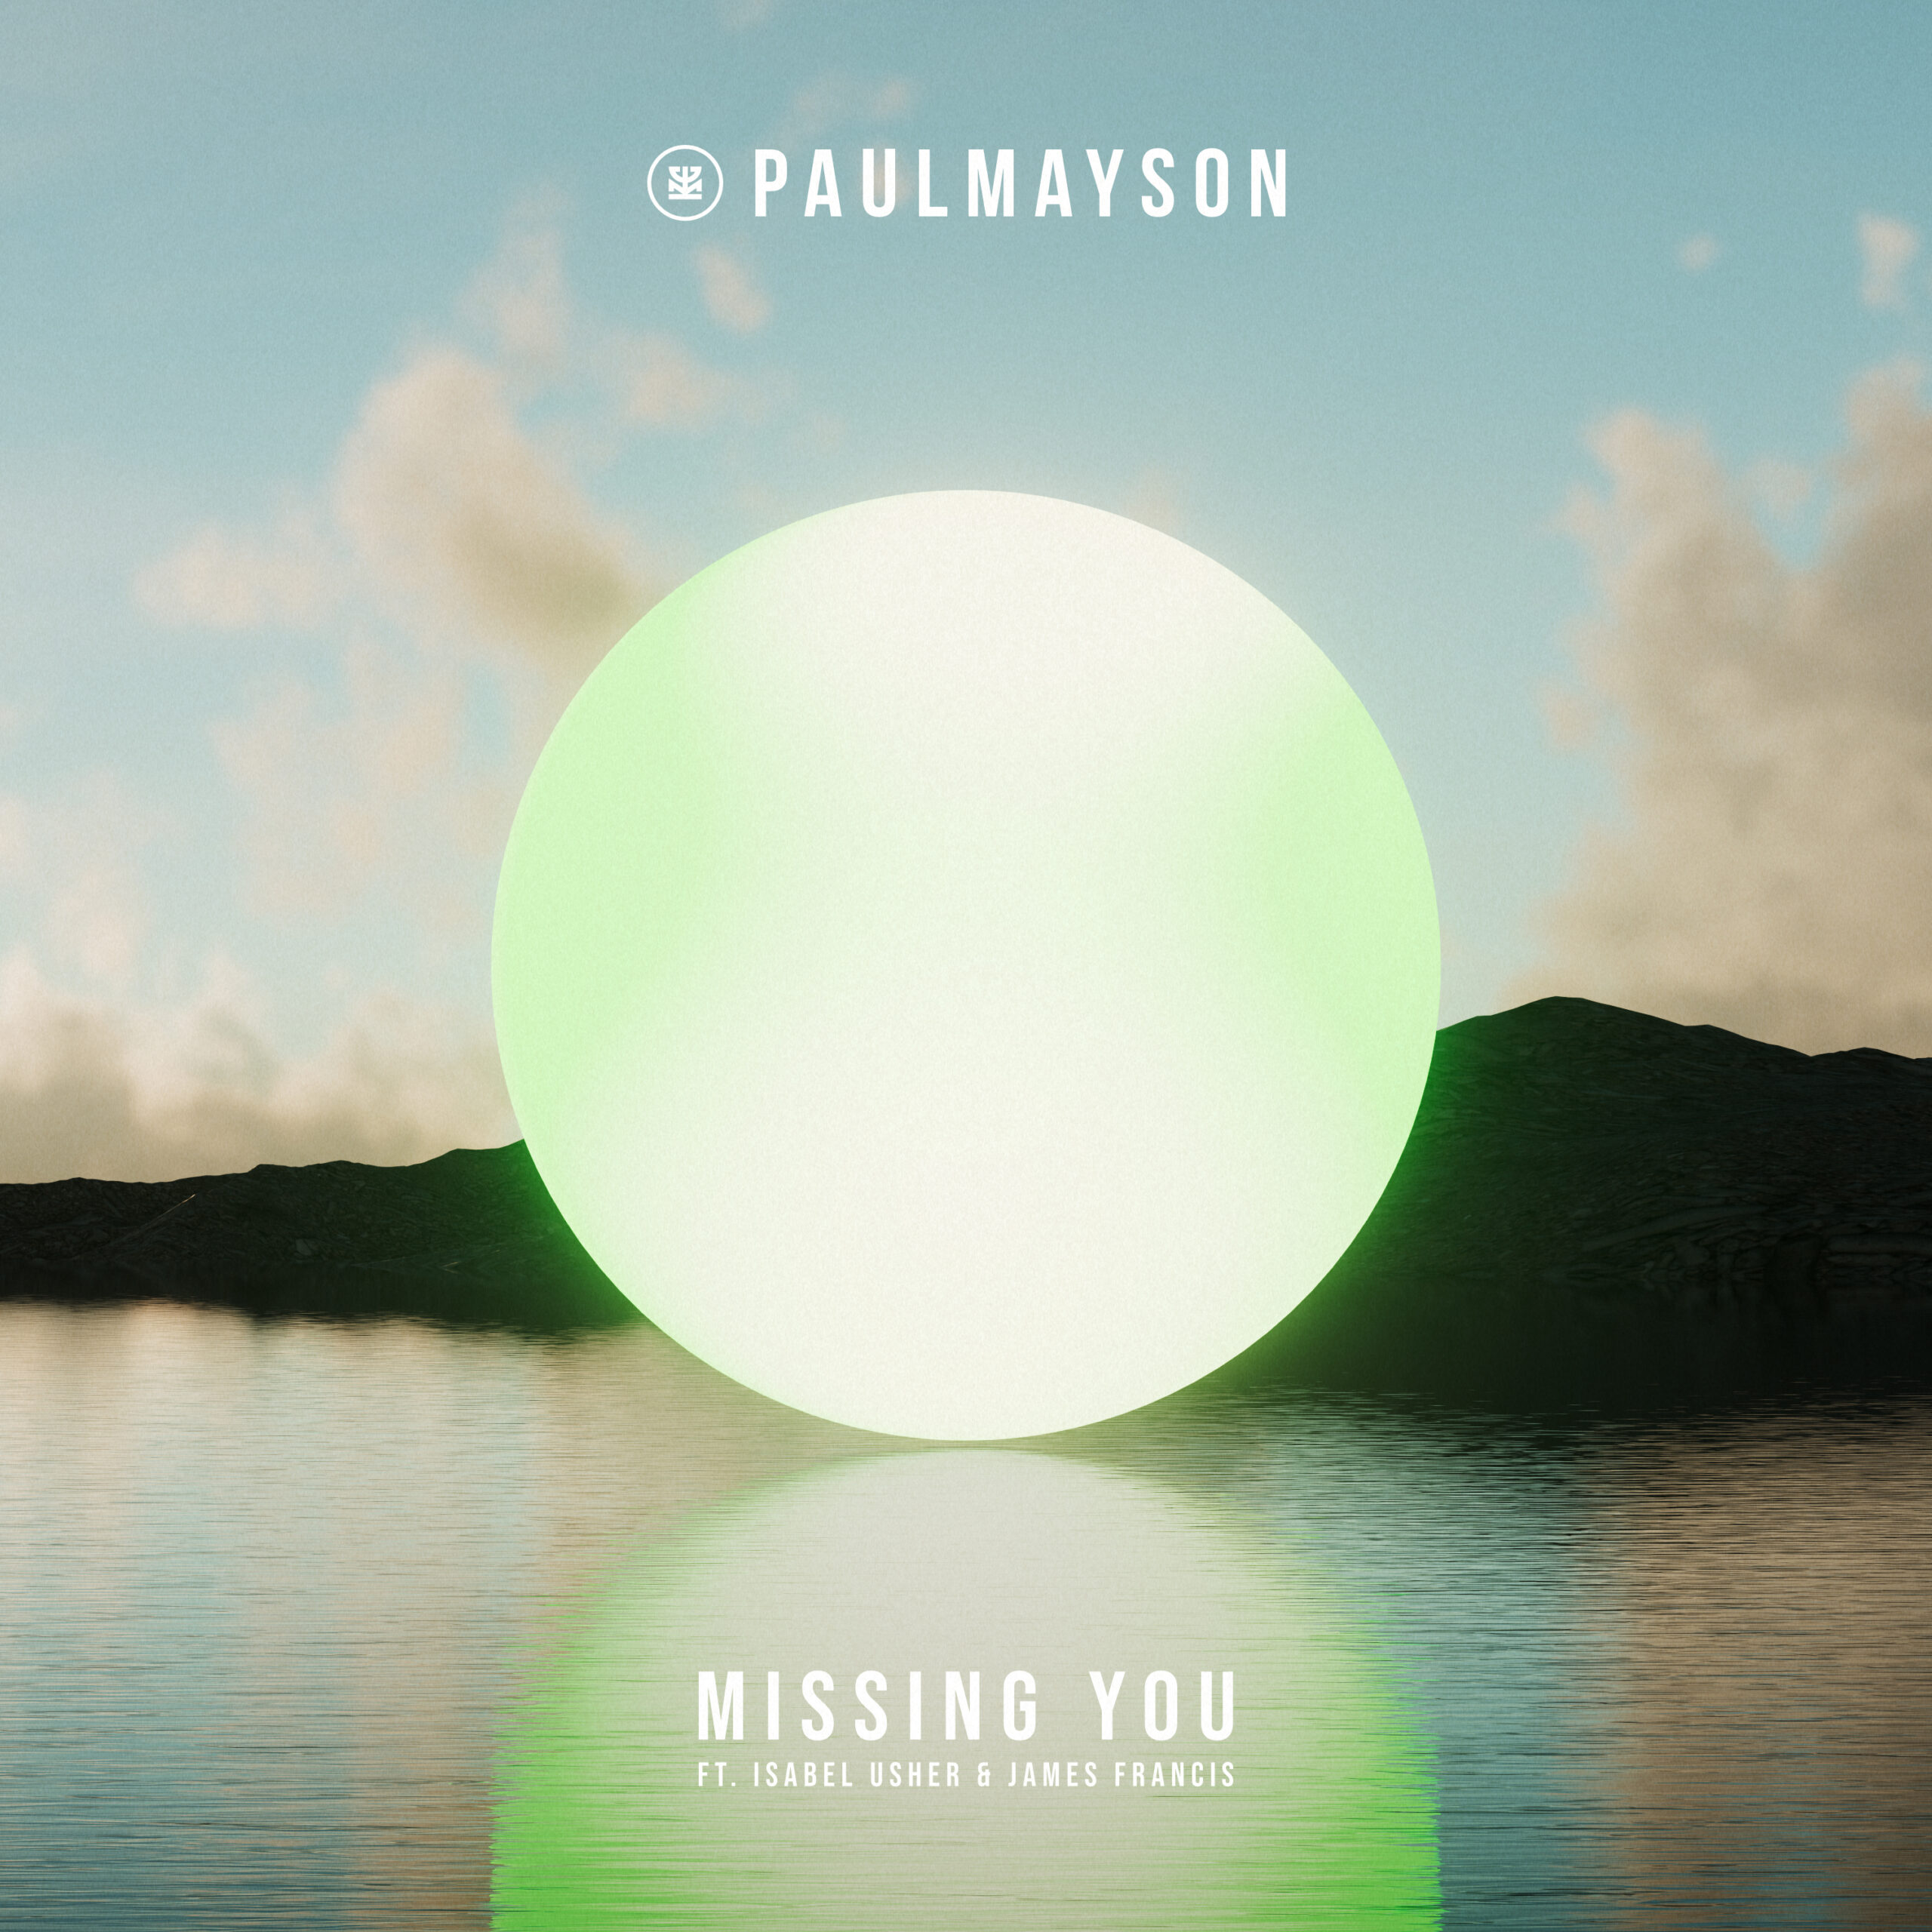 PAUL MAYSON PUSHES BOUNDARIES WITH ECLECTIC HOUSE SINGLE ‘MISSING YOU’ & ANNOUNCES DEBUT ALBUM 